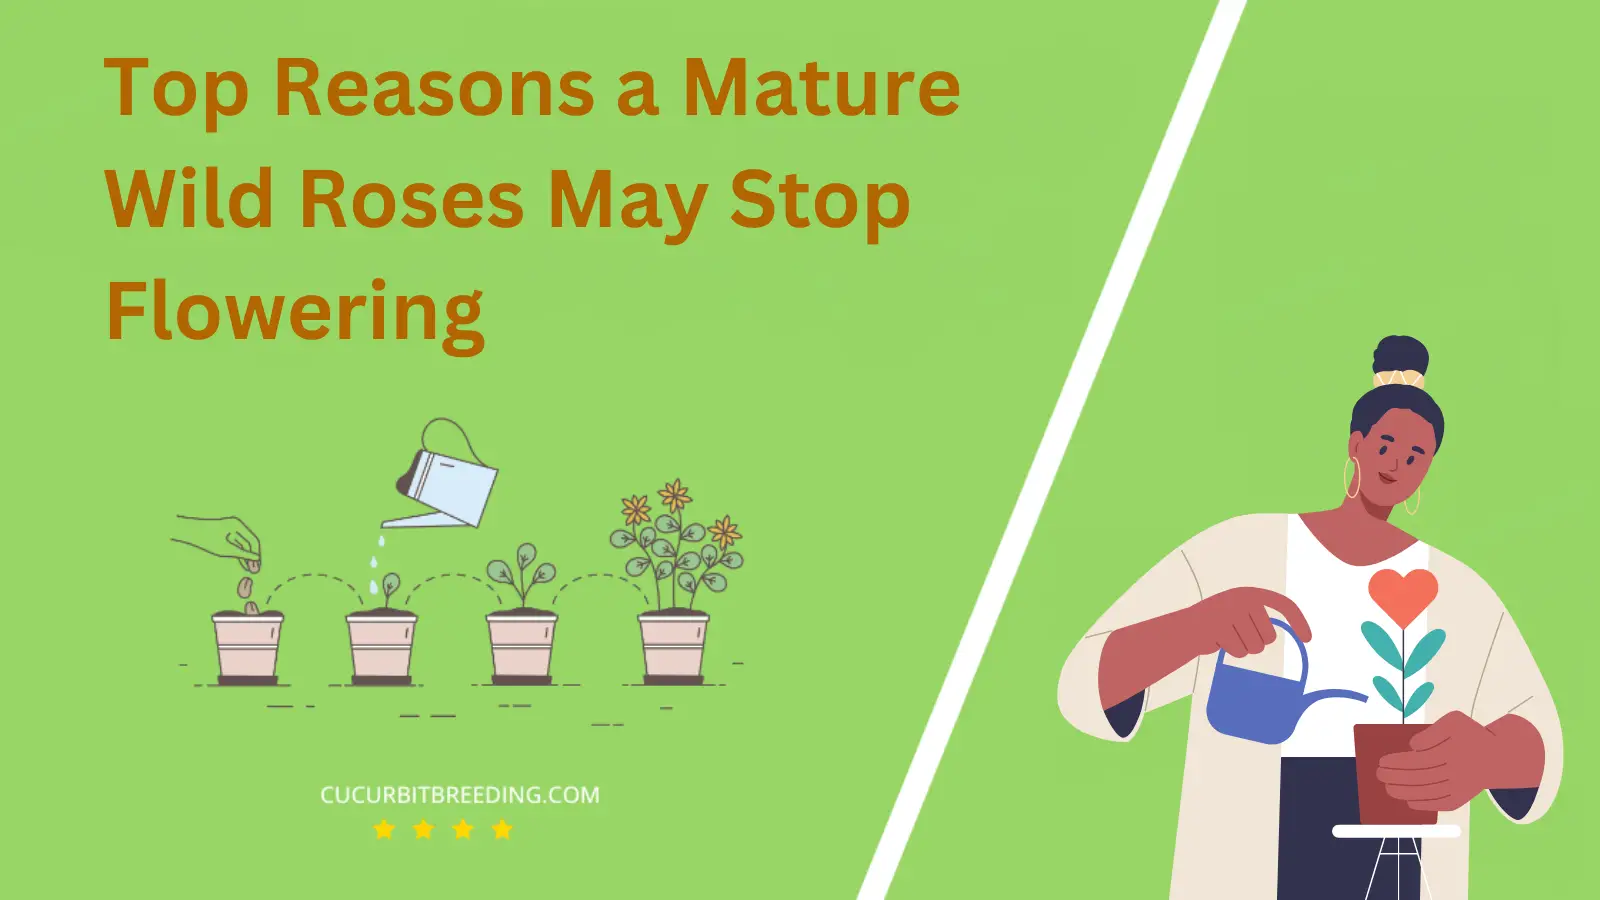 Top Reasons a Mature Wild Roses May Stop Flowering